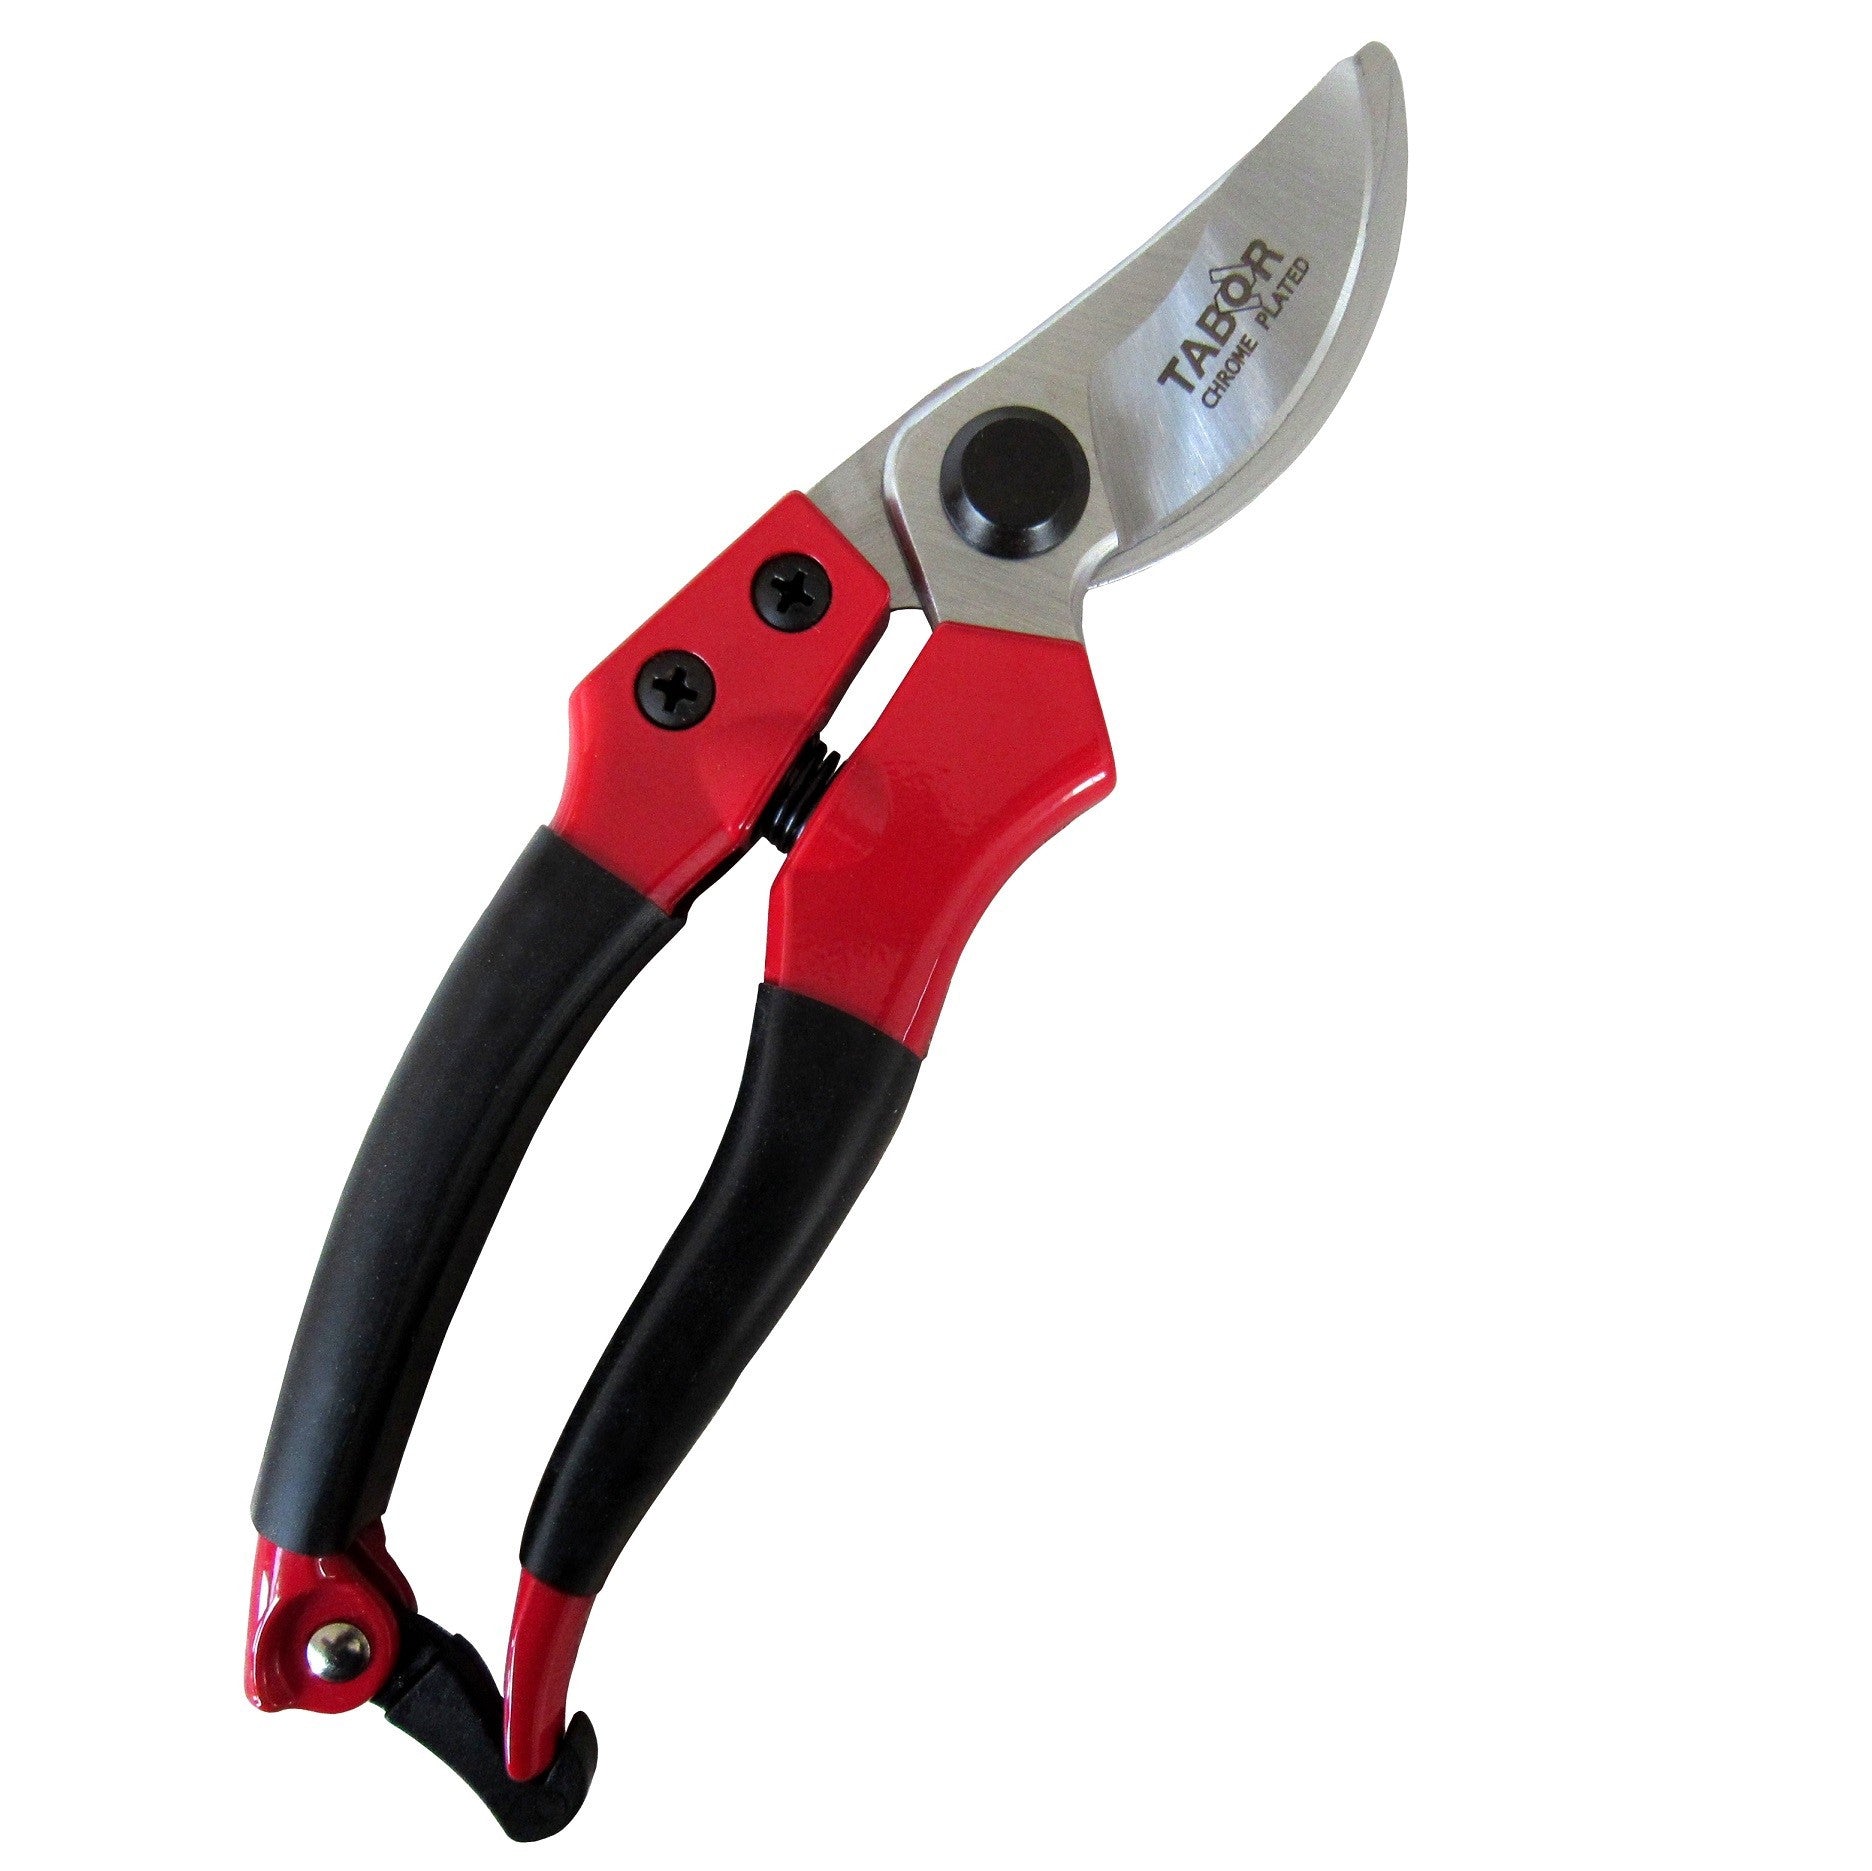 Tabor Tools S-821 Pruning Shears for Small/Medium Size Hands